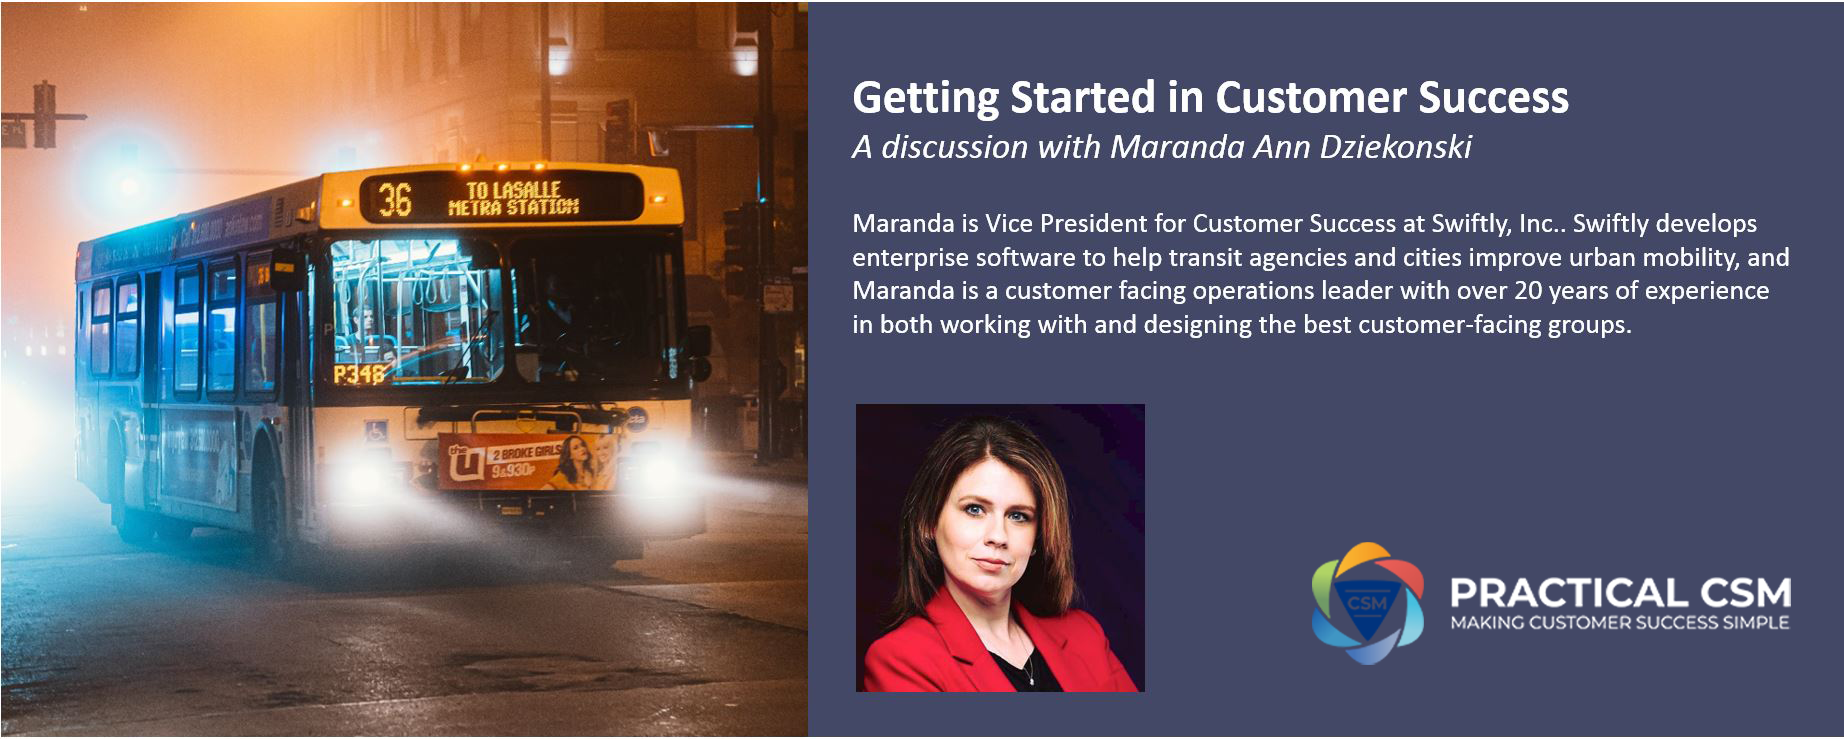 Getting Started in Customer Success (Audio)- Practical CSM